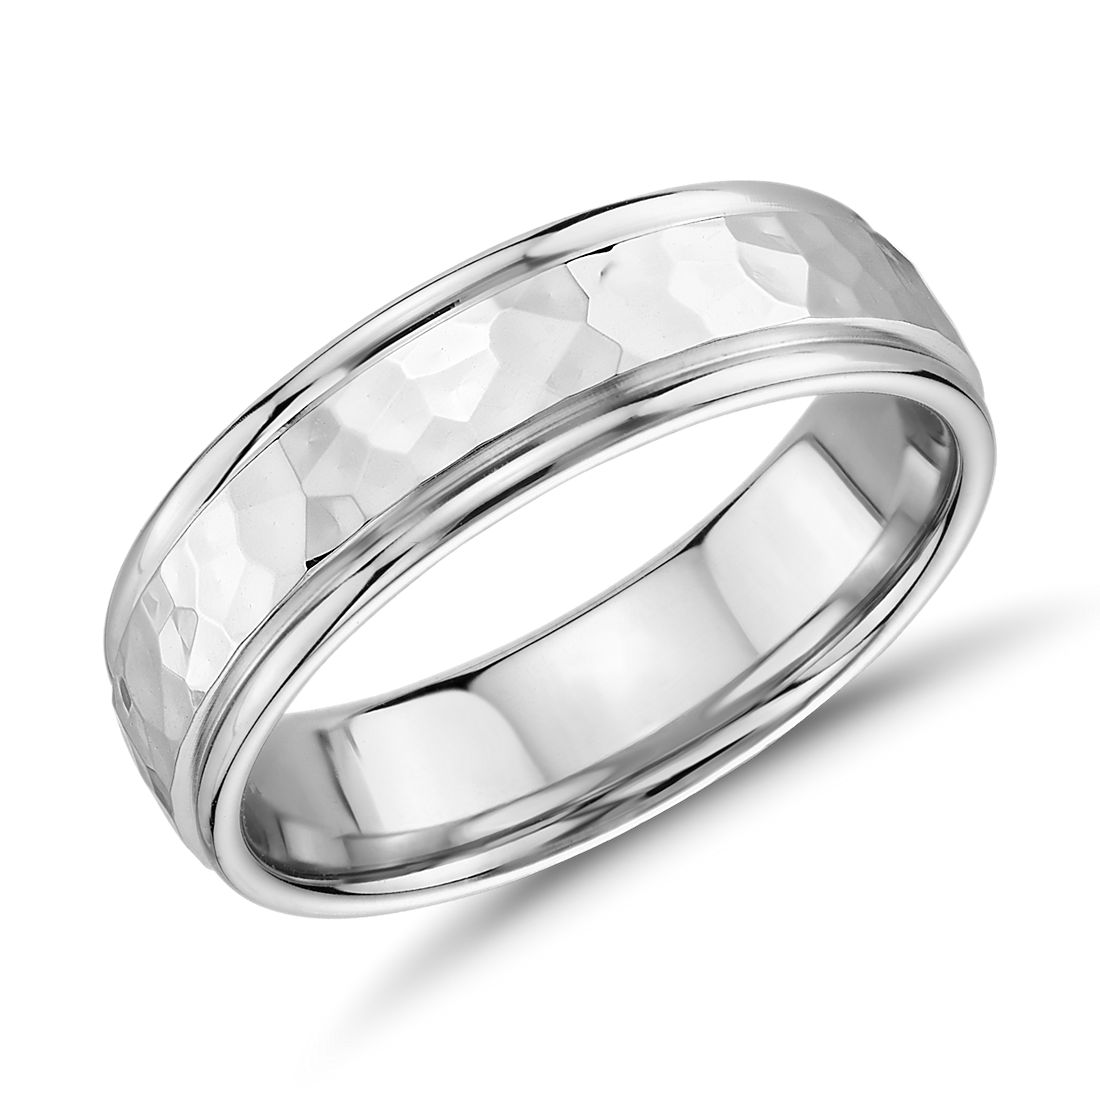 Hammered Inlay Wedding Band in 14k White Gold (6.5mm